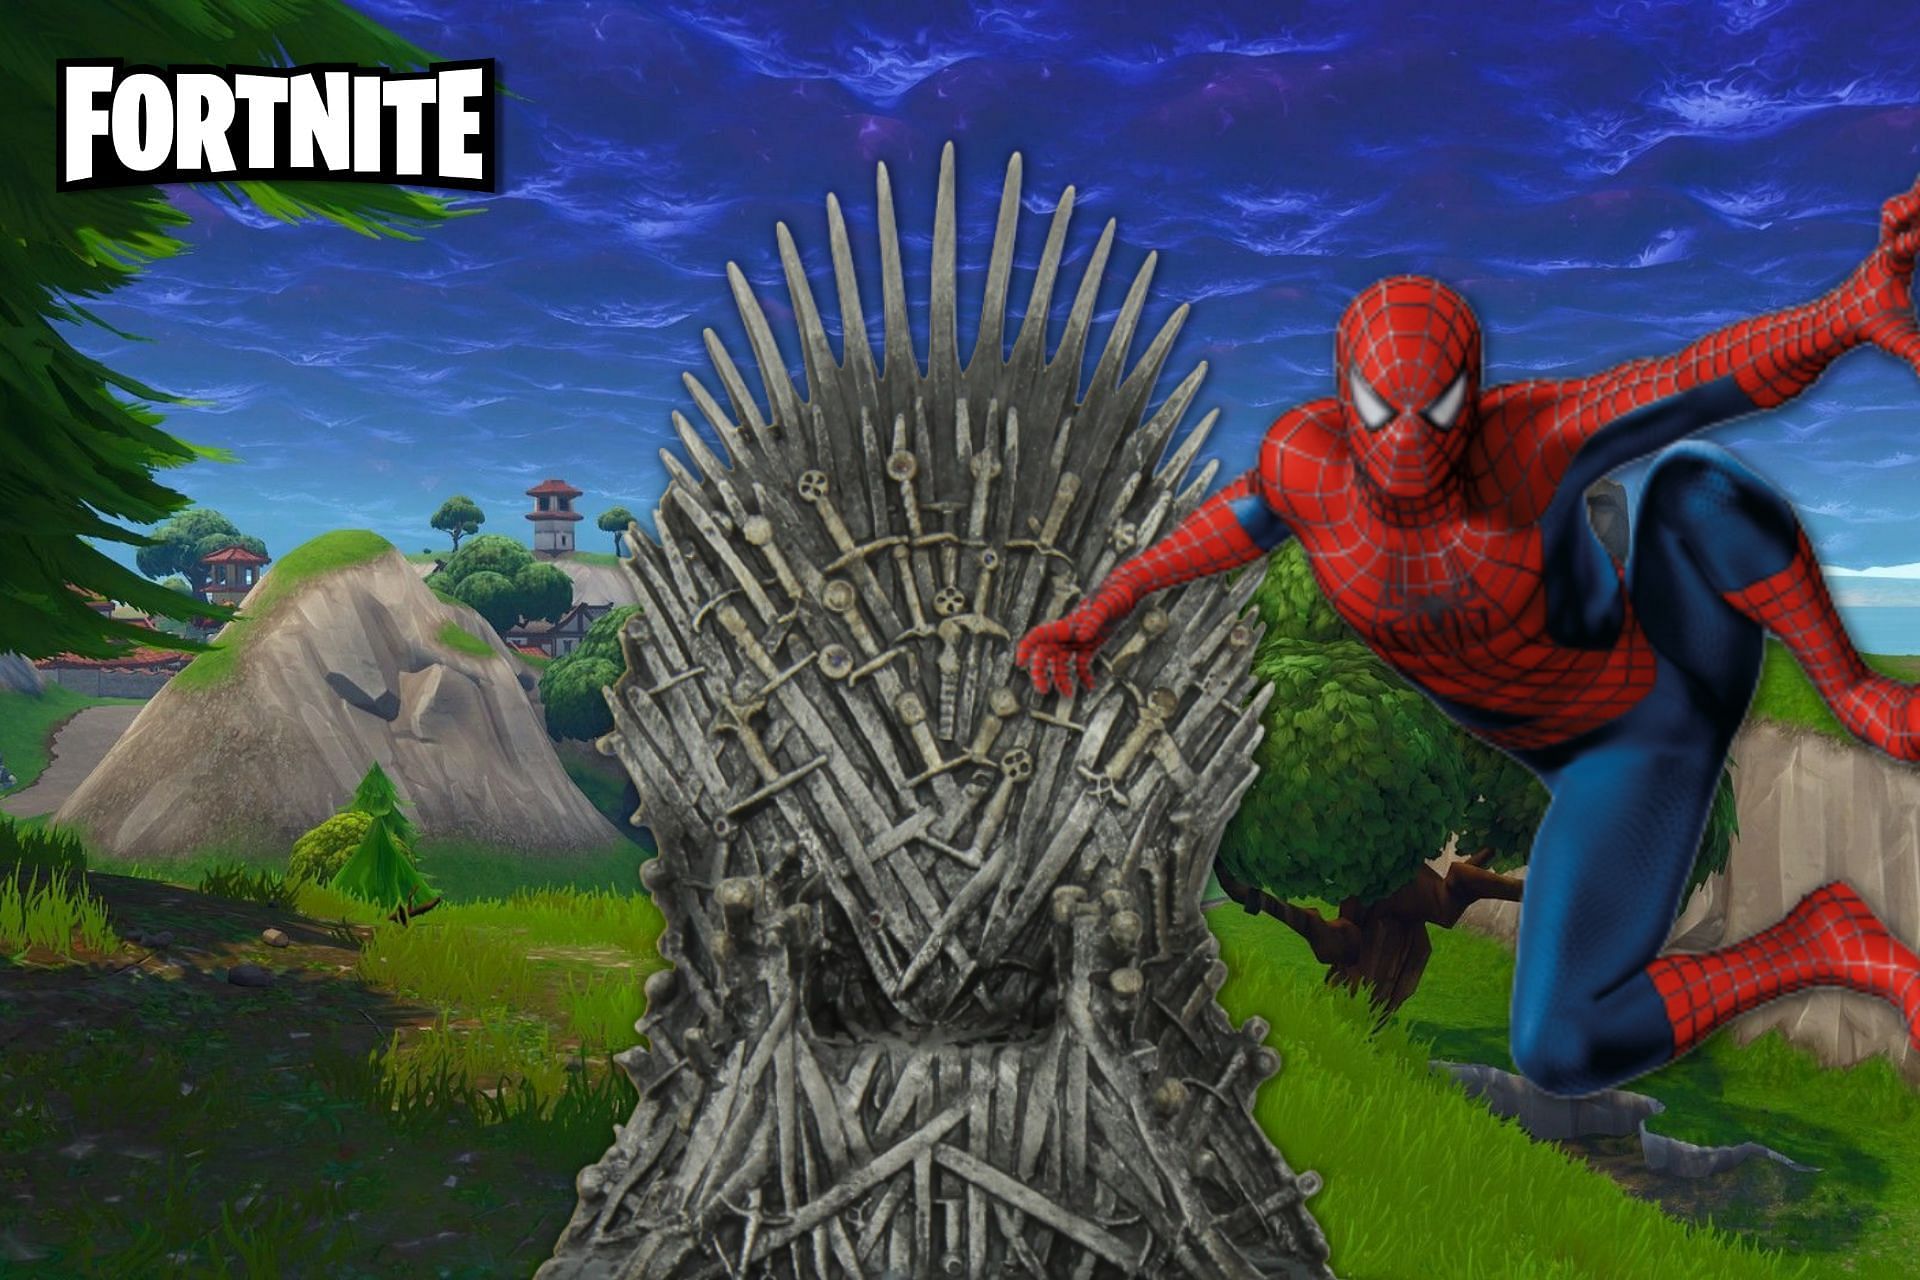 Fortnite Chapter 3 leaks reveal Spider-Man and Games of Thrones collaborations (Image via Sportskeeda)